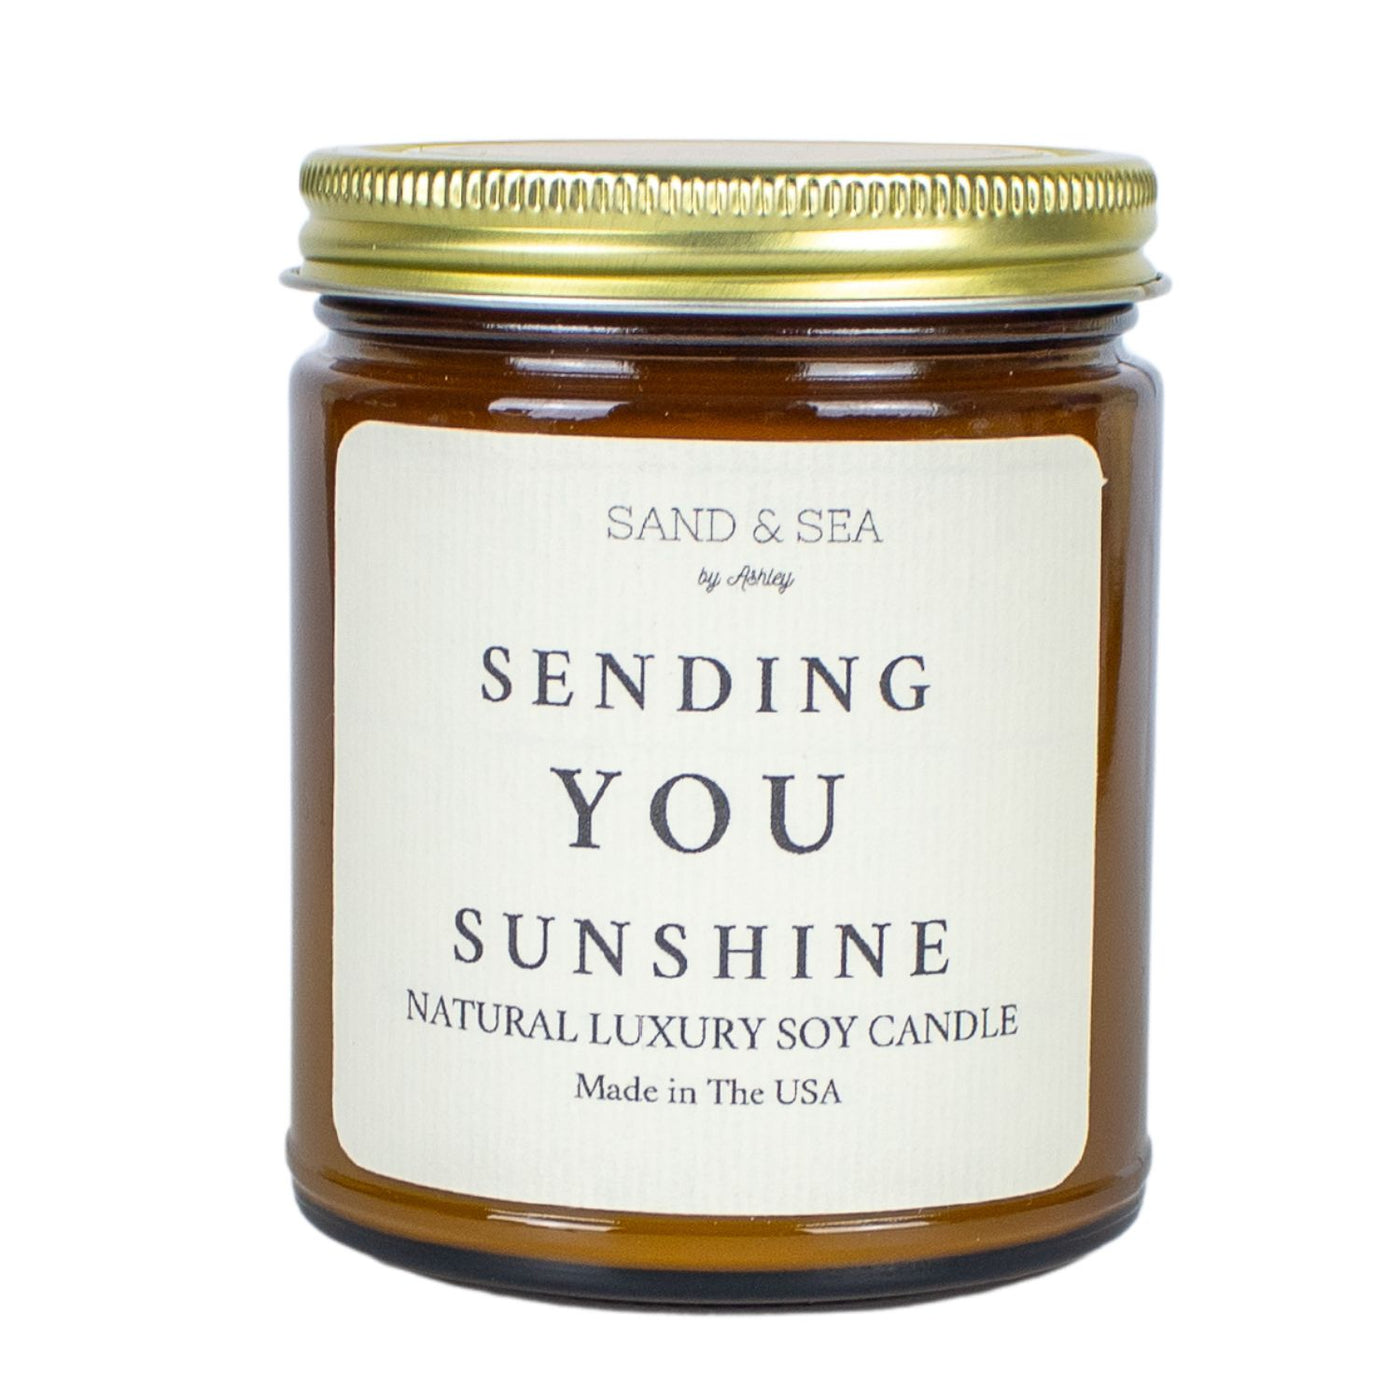 Sending You Sunshine Candle Gift Set with Luxury Safety Matches and Candle Care Kit - 6 Pieces